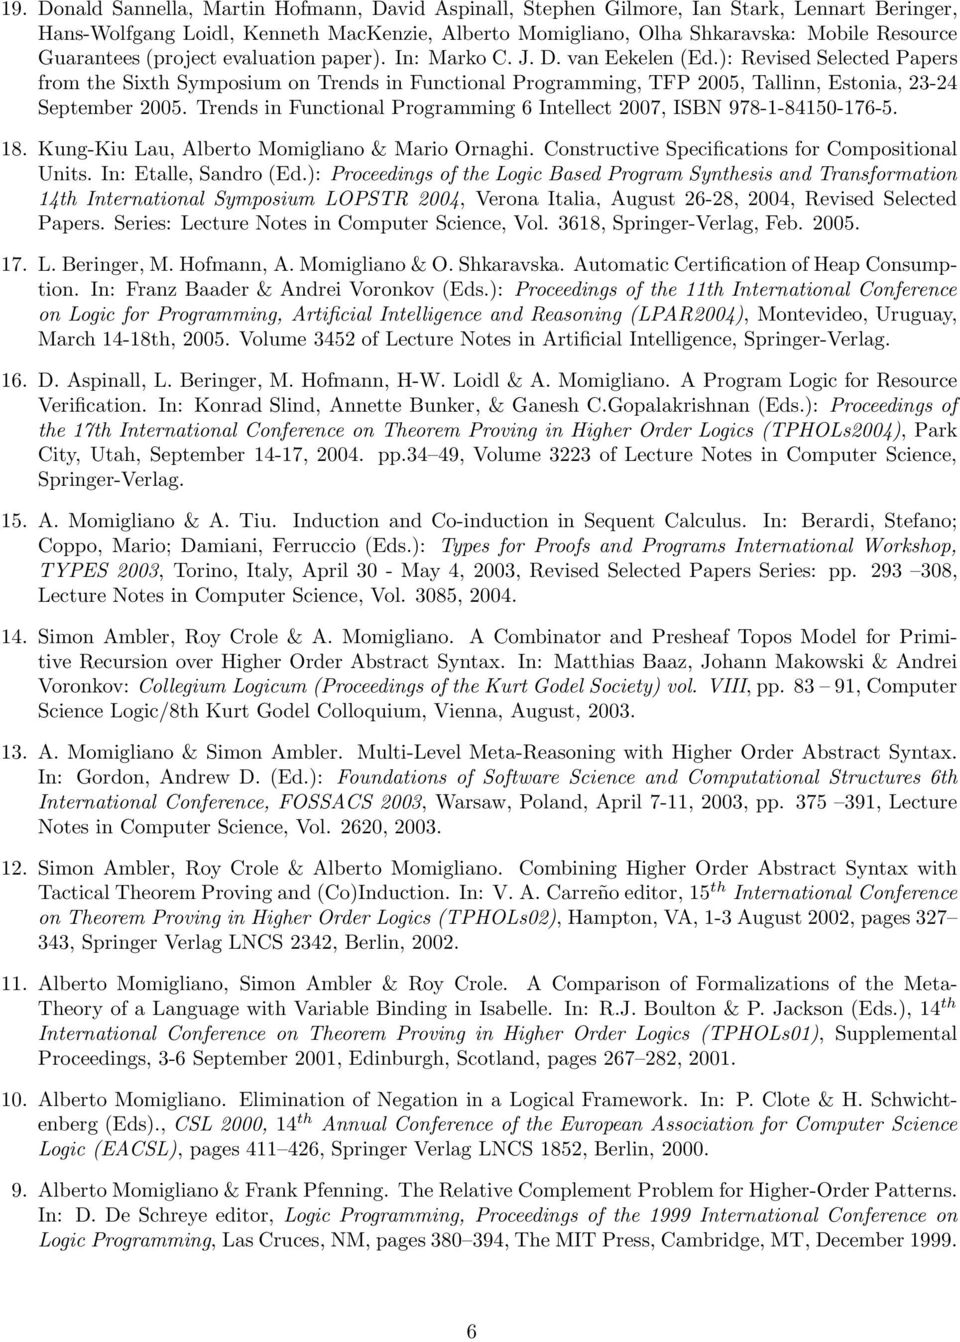 ): Revised Selected Papers from the Sixth Symposium on Trends in Functional Programming, TFP 2005, Tallinn, Estonia, 23-24 September 2005.